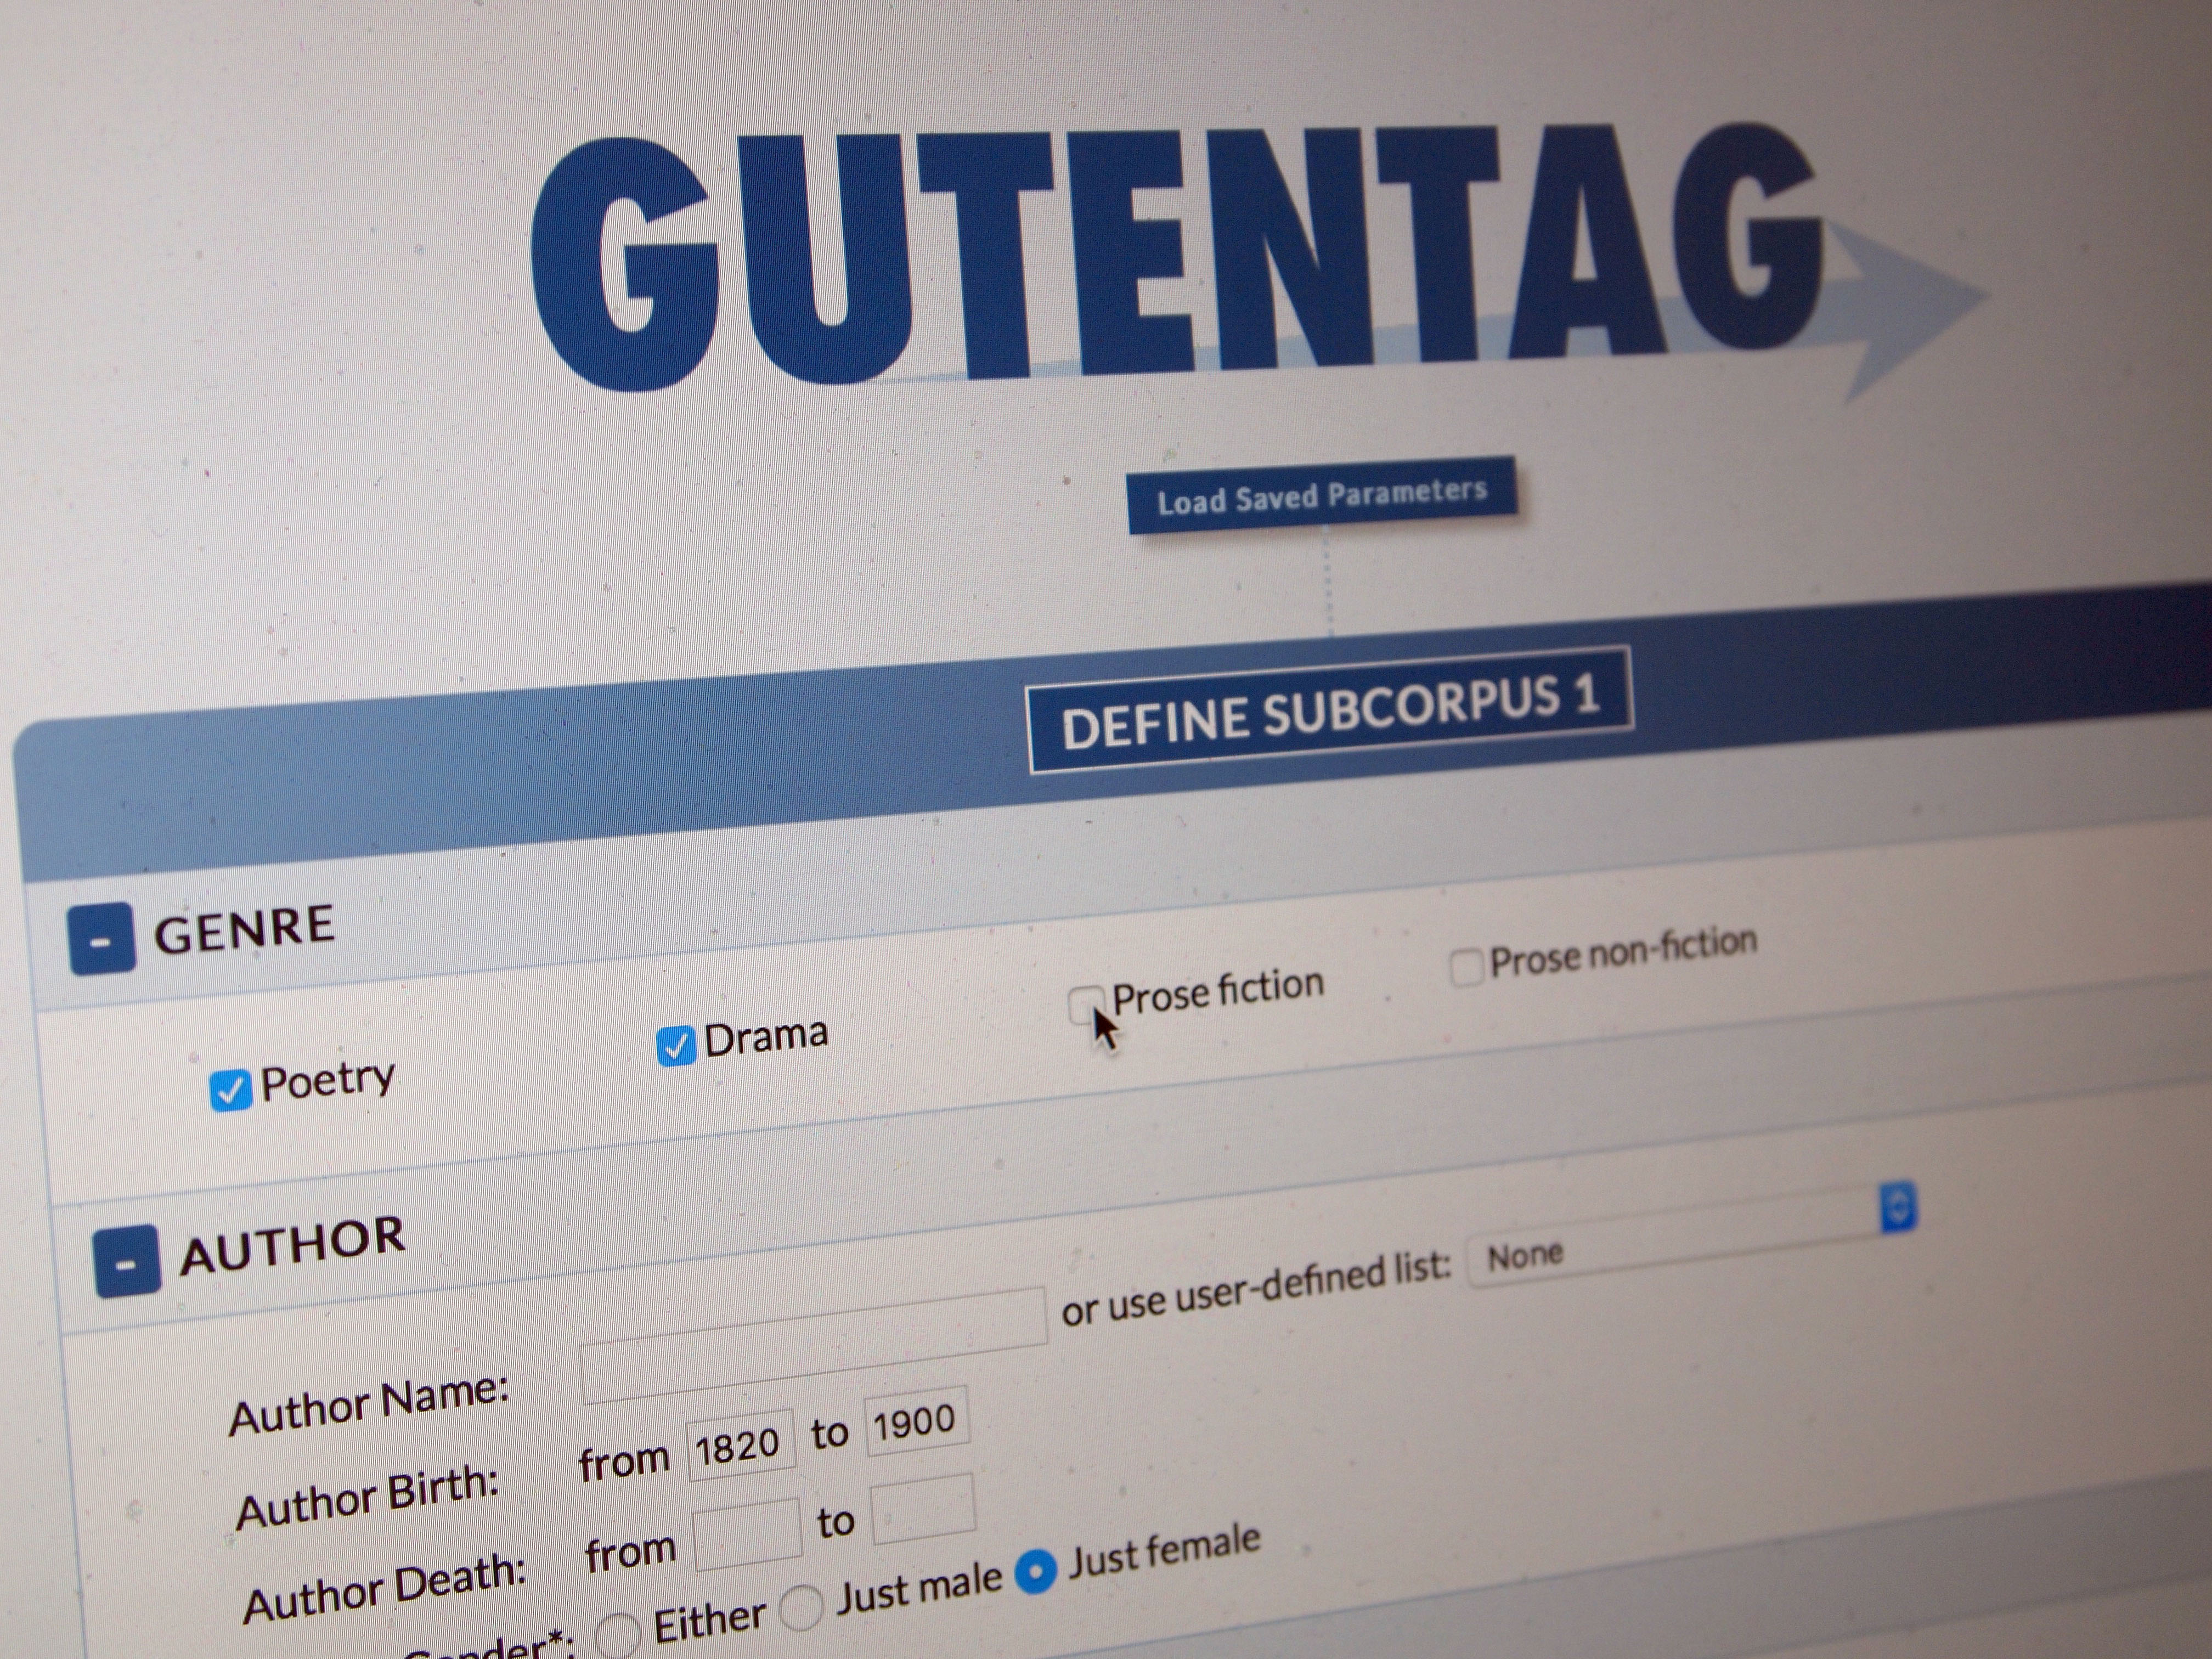 The main GutenTag interface.